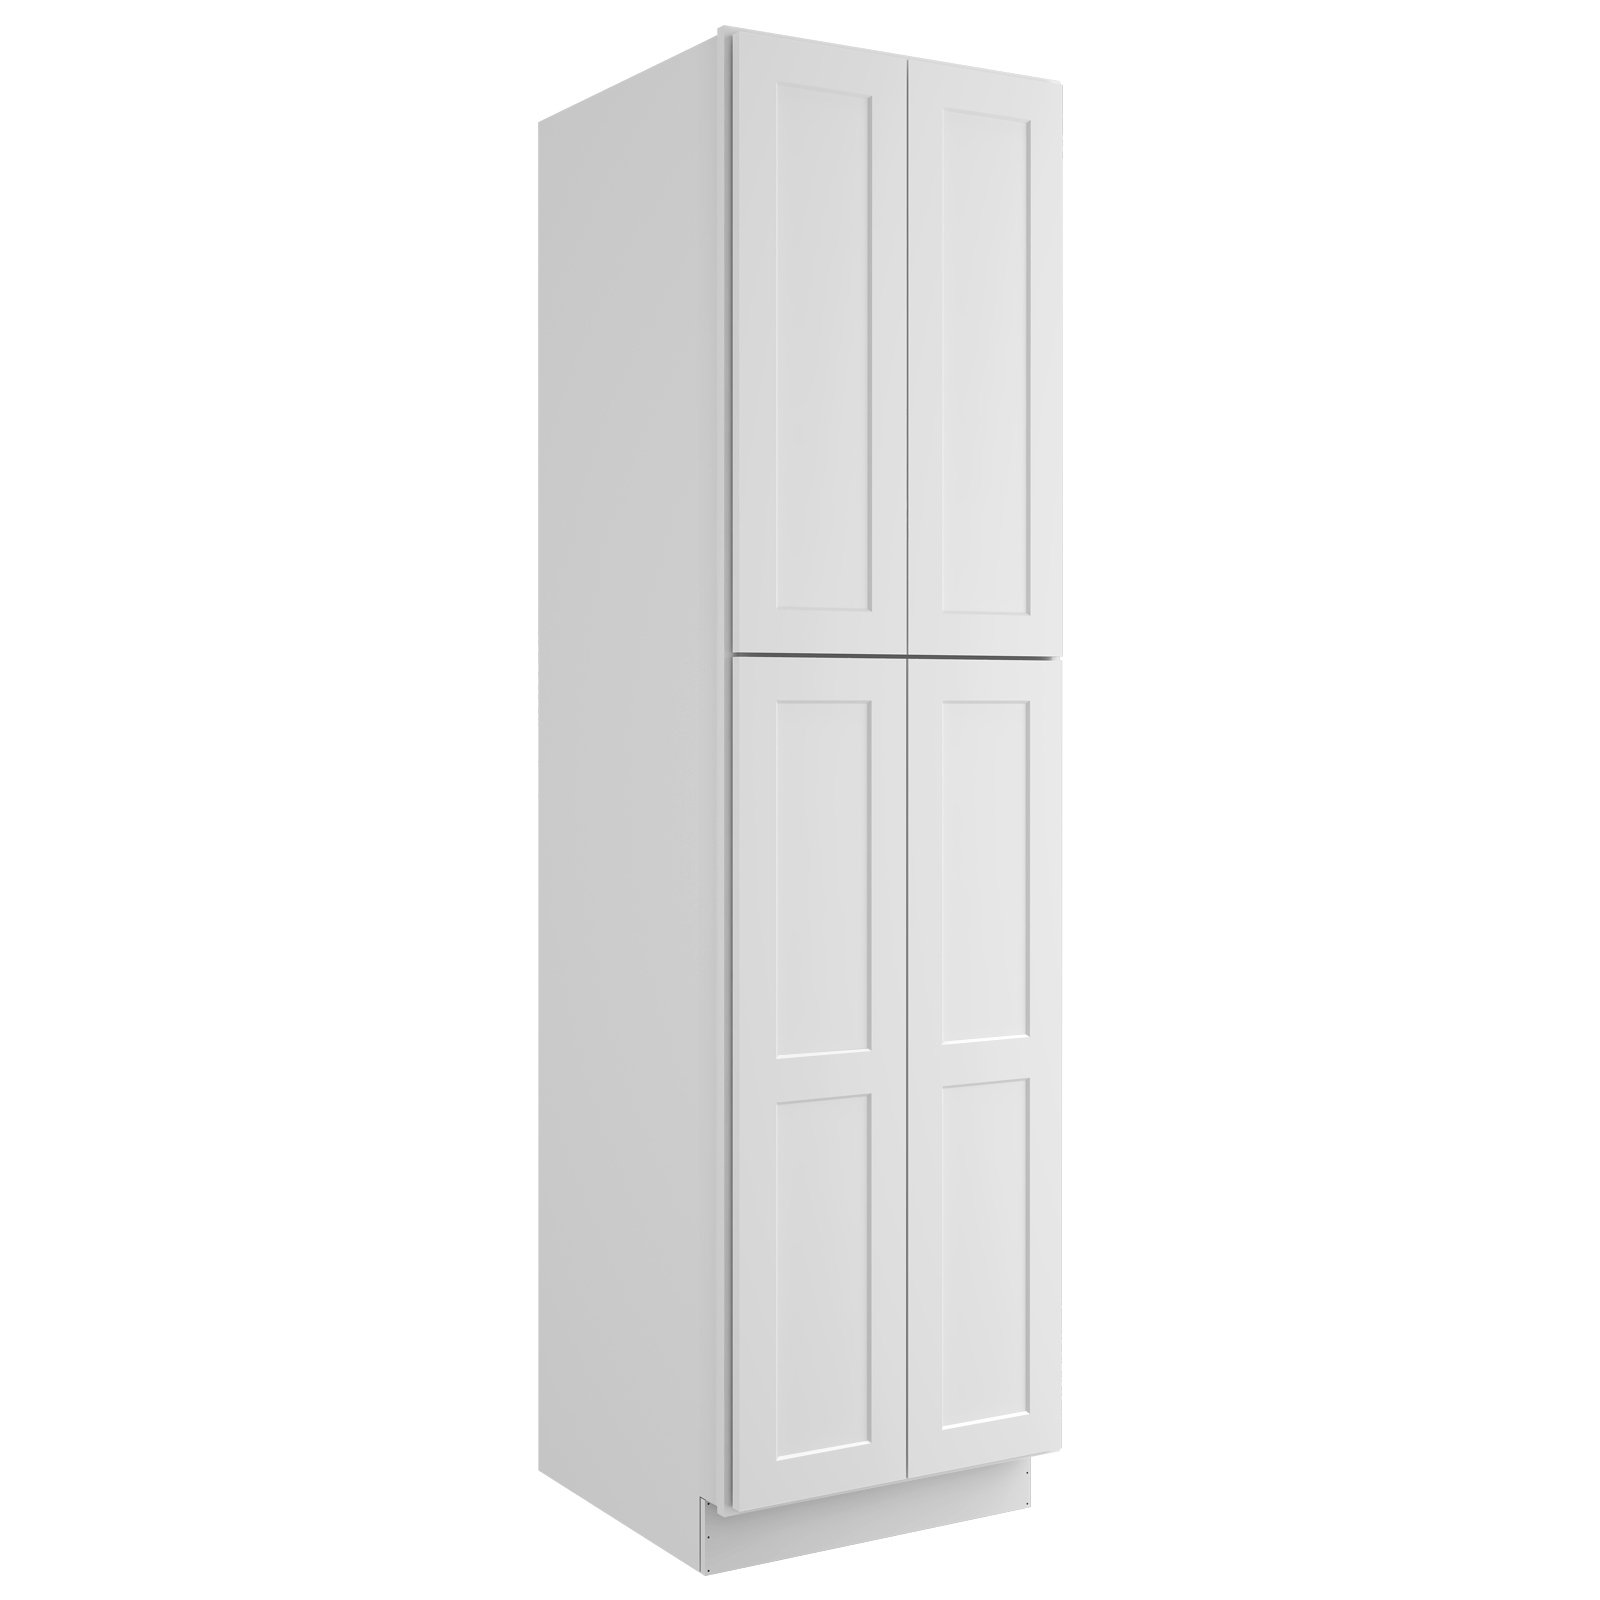 Pantry Cabinettall Narrow Cabinet With Doors And Adjustable Shelveswall Cabinet For Kitchen Freestanding Utility Storage Cabinet For Bedroombathroom Living Room 